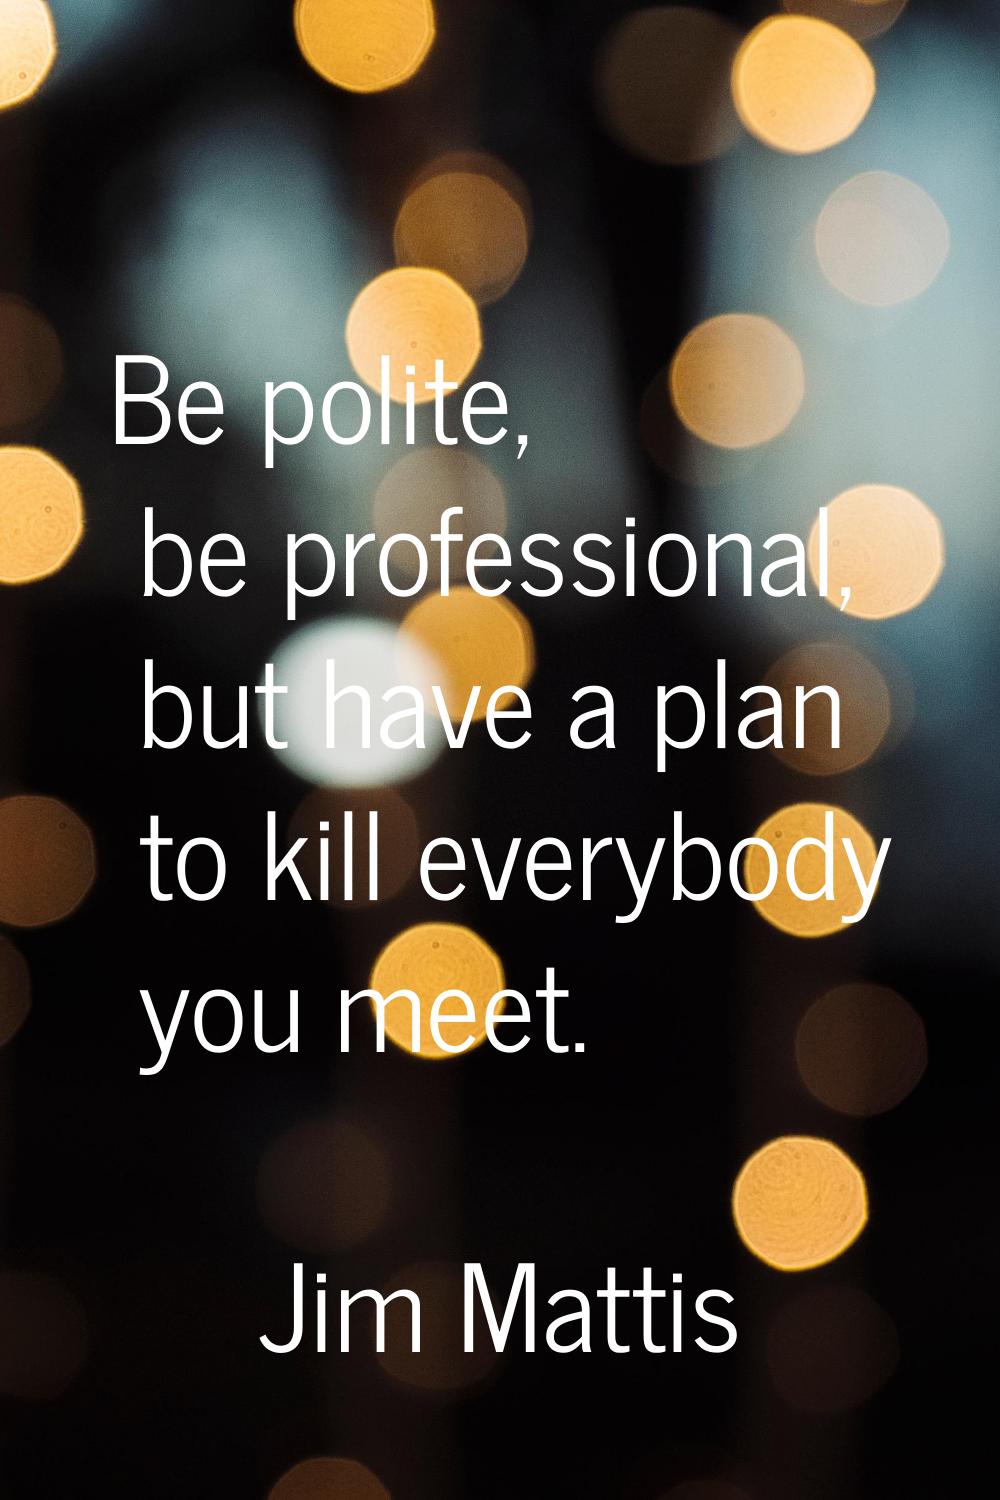 Be polite, be professional, but have a plan to kill everybody you meet.